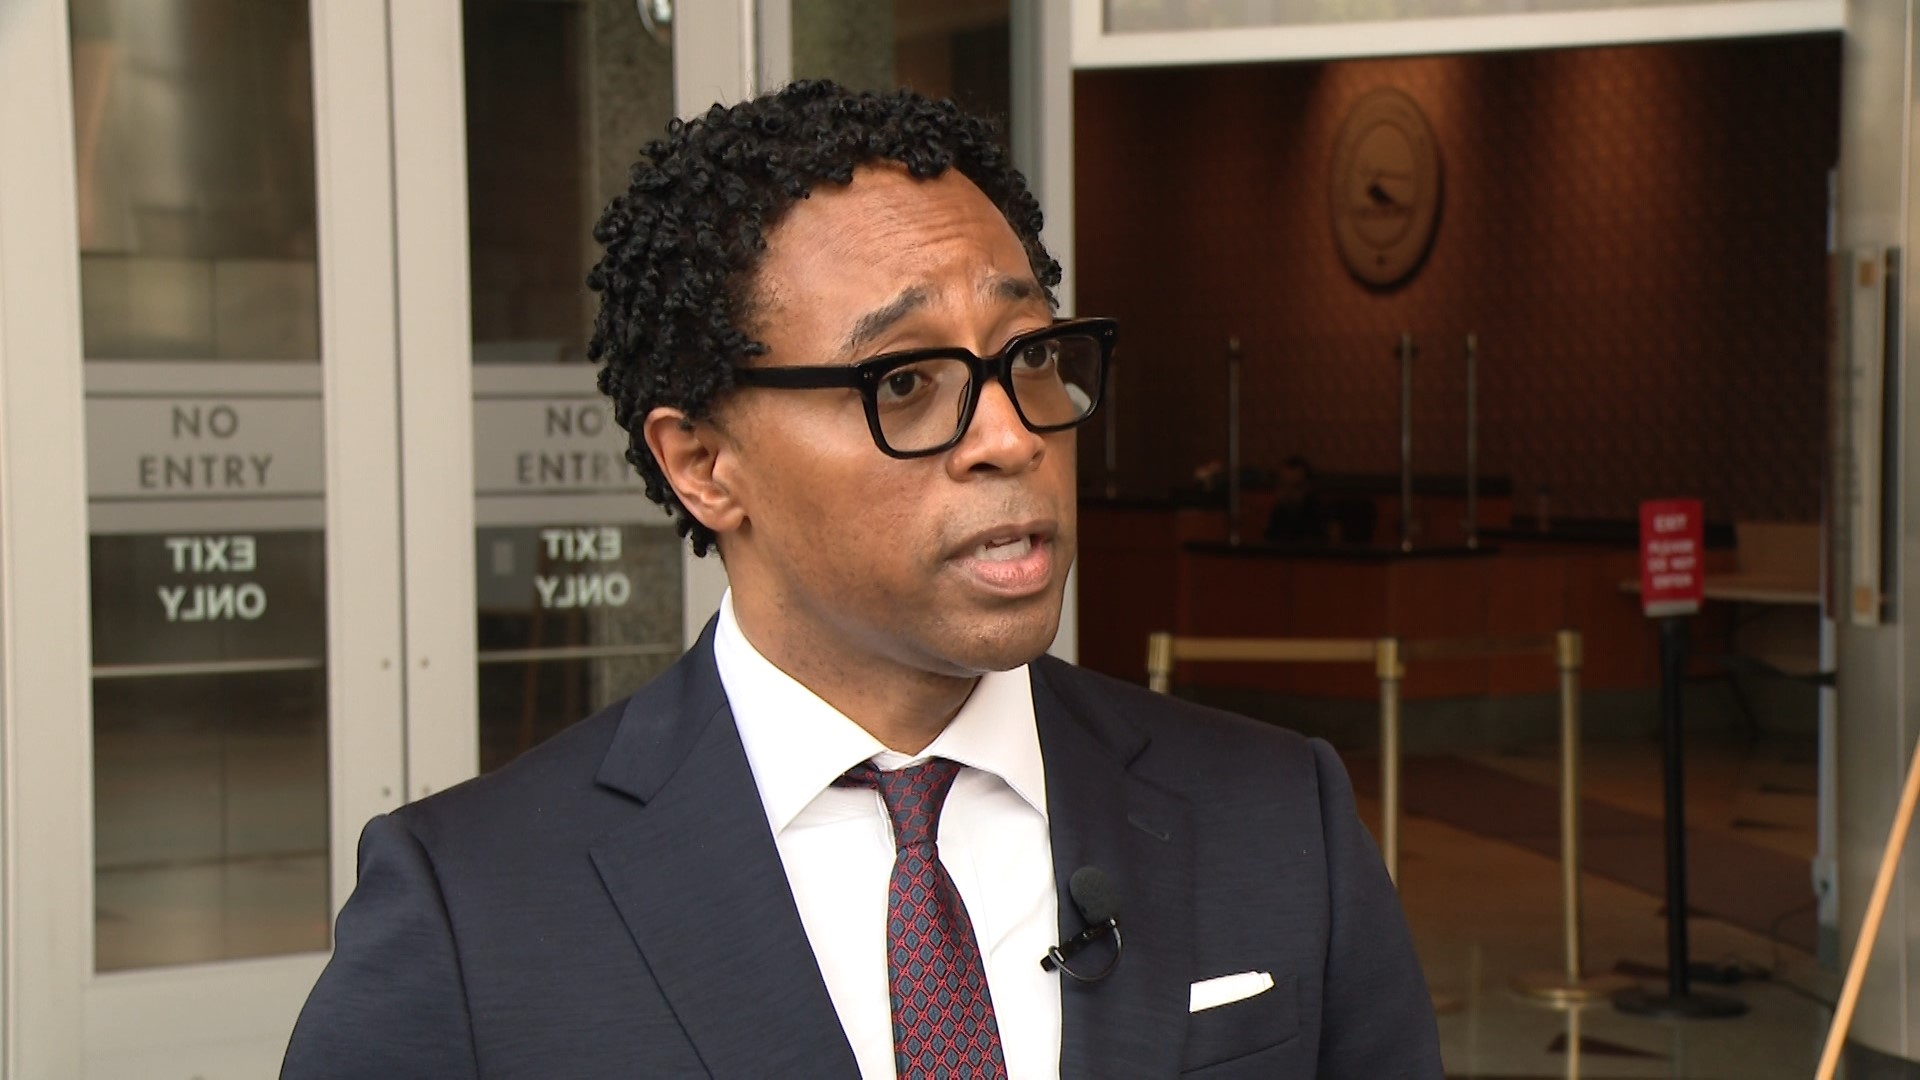 St. Louis County's Wesley Bell said he's one of several area prosecutors the governor's transition team is asking to help in the St. Louis Circuit Attorney's Office.